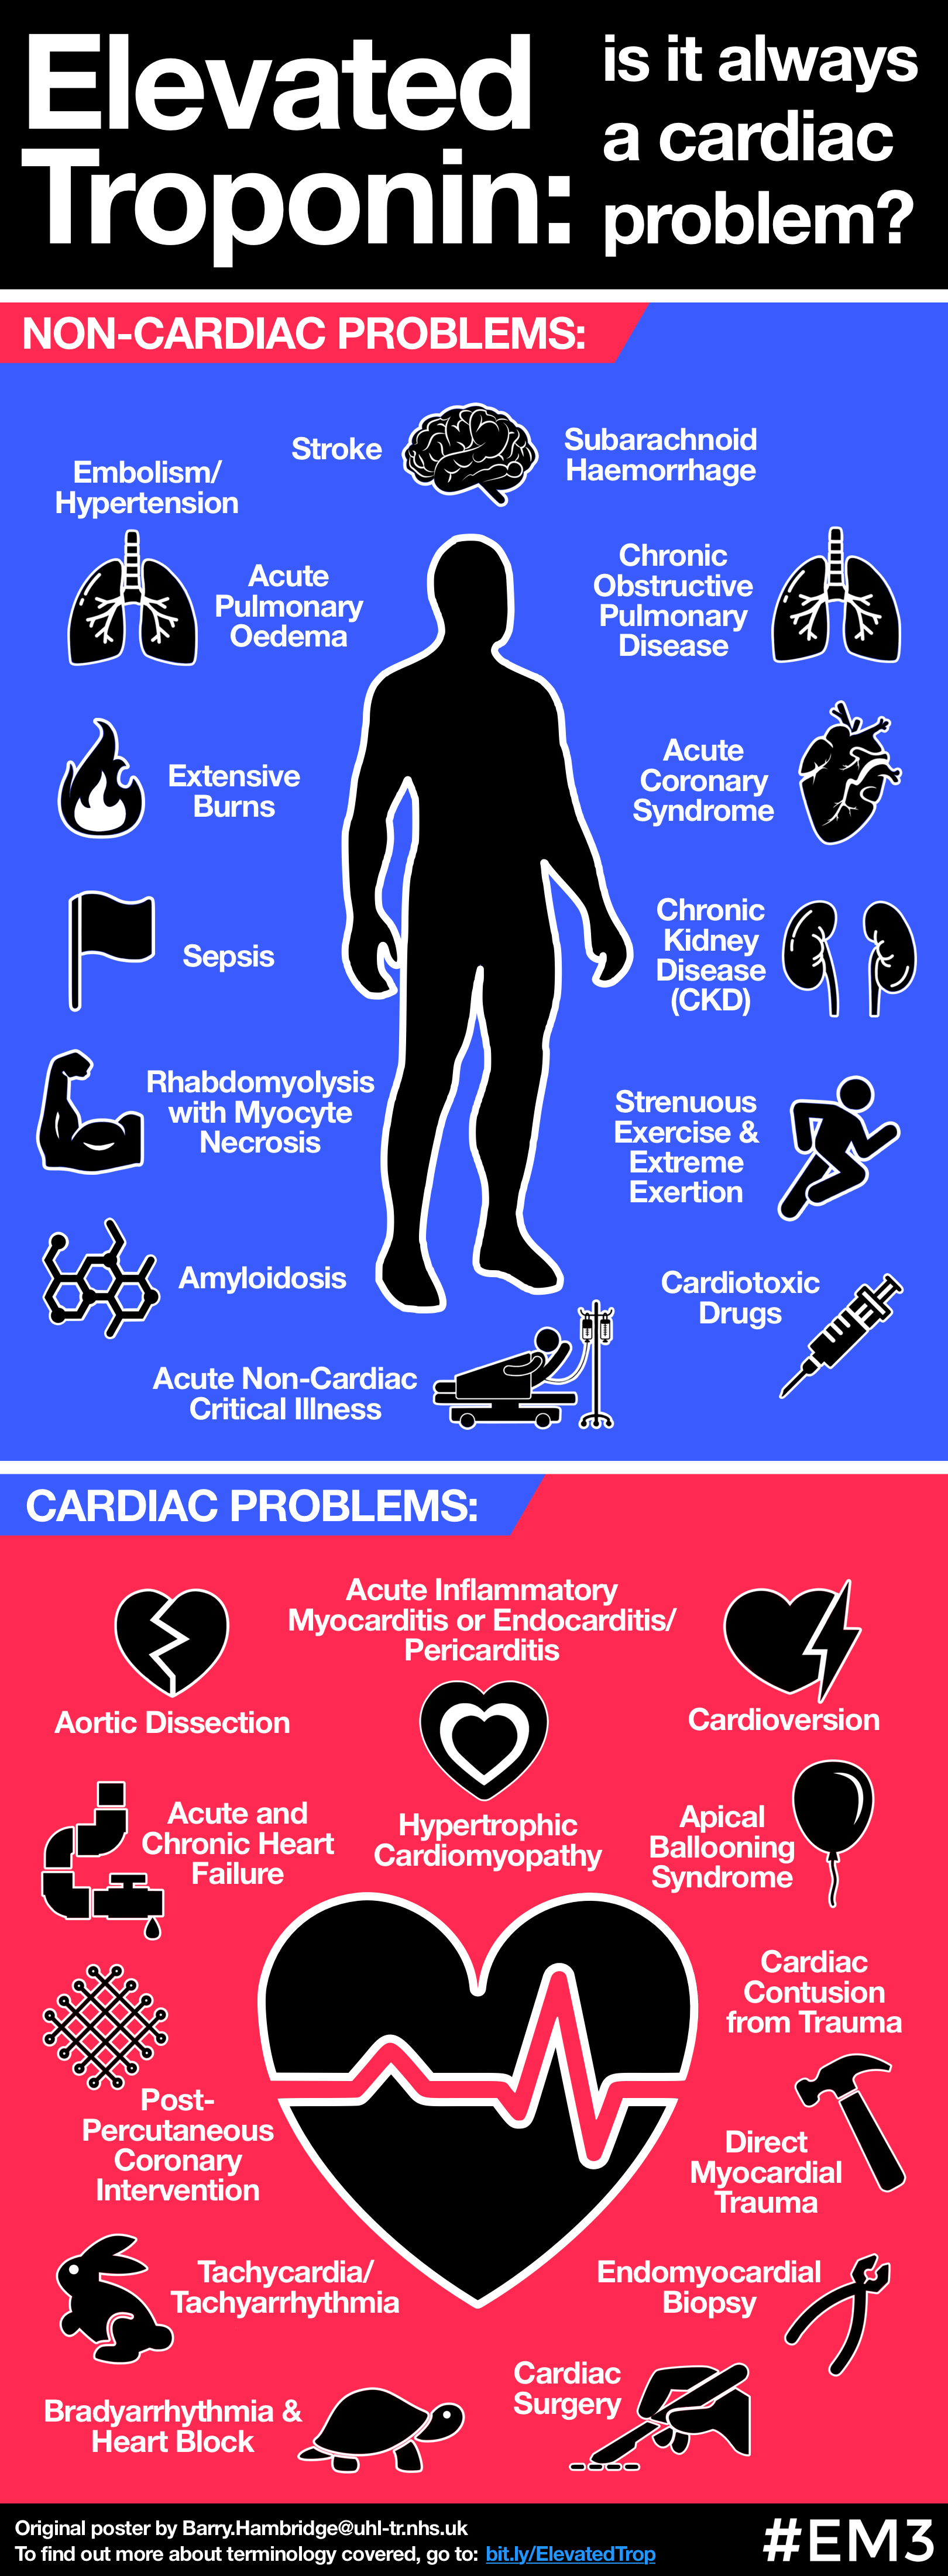 Elevated Troponin (infographic).png